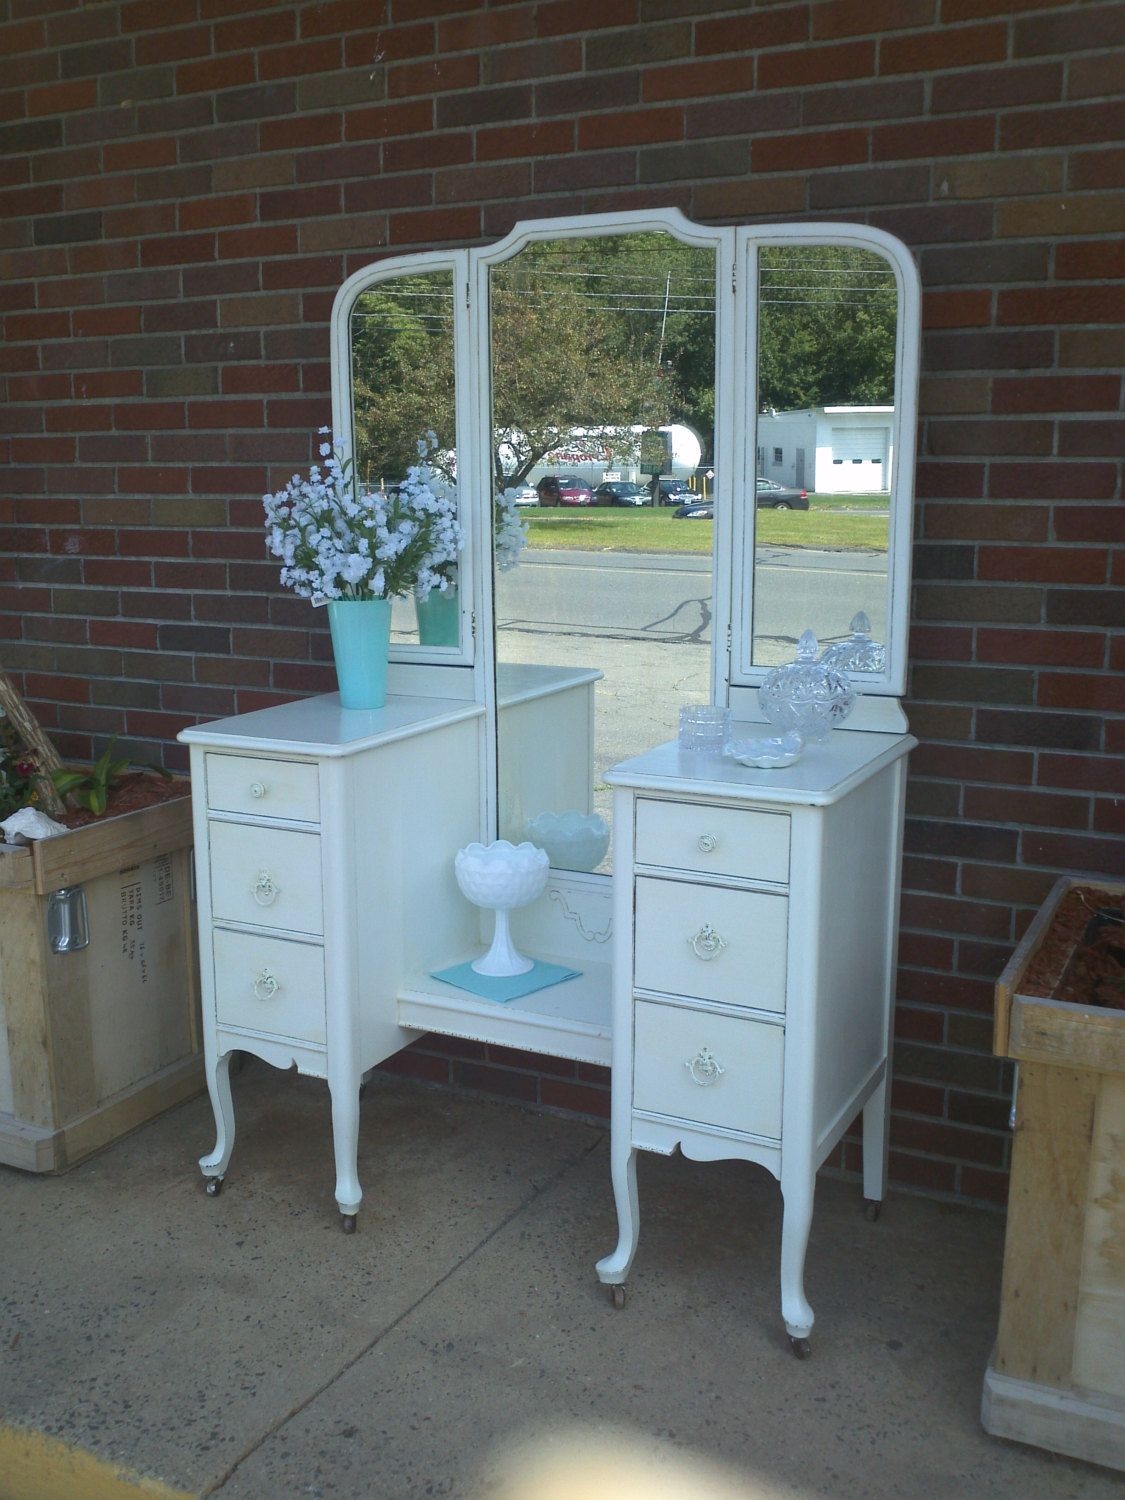 Circa 20s antique white vanity dressing table salvaged shabby chic